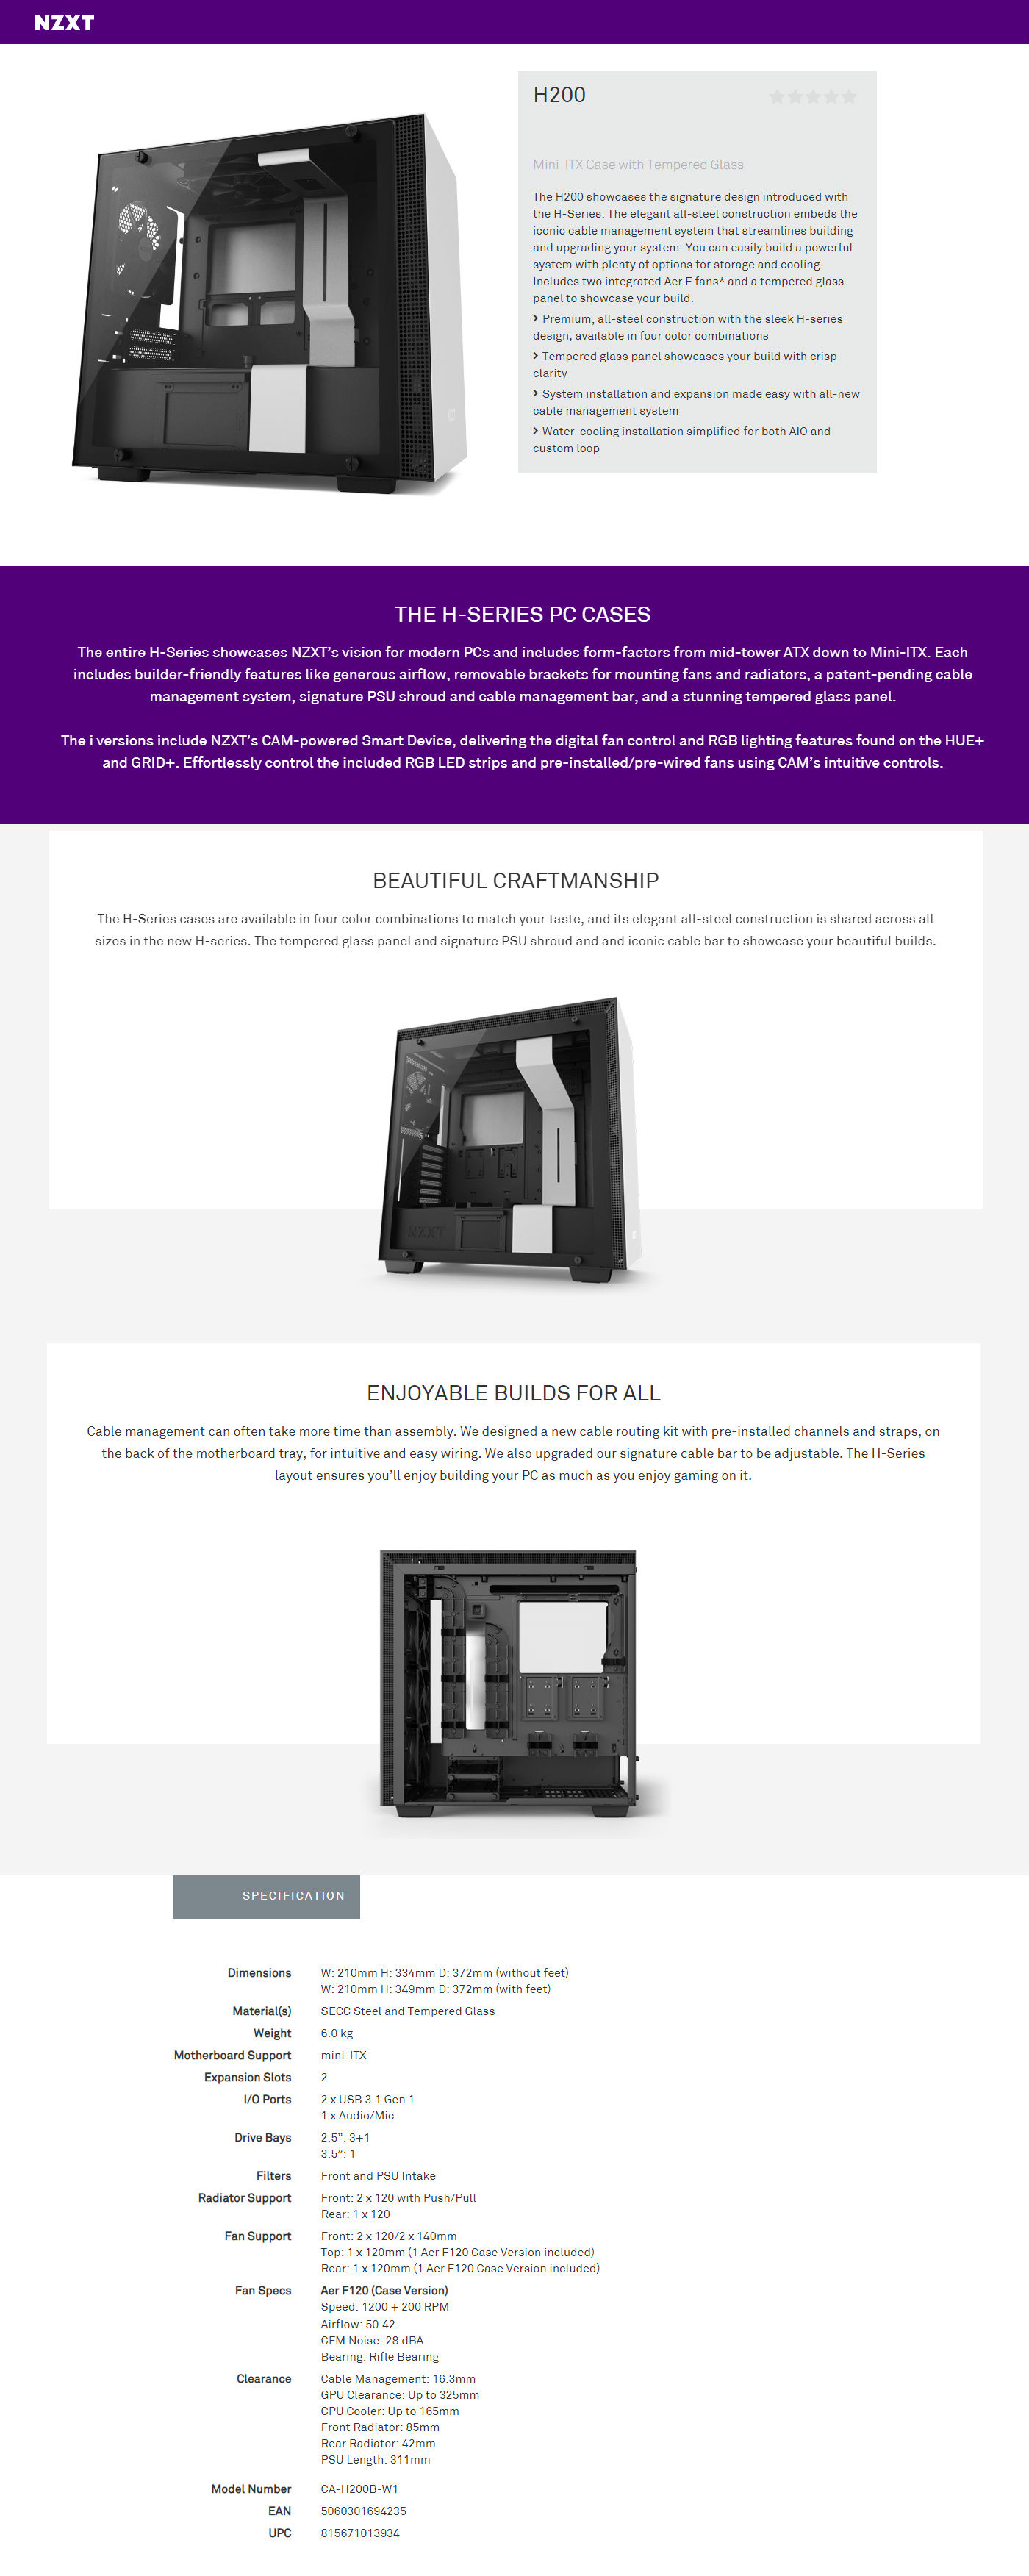  Buy Online Nzxt H200 Mini-ITX Case with Tempered Glass - Matte White (CA-H200B-W1)